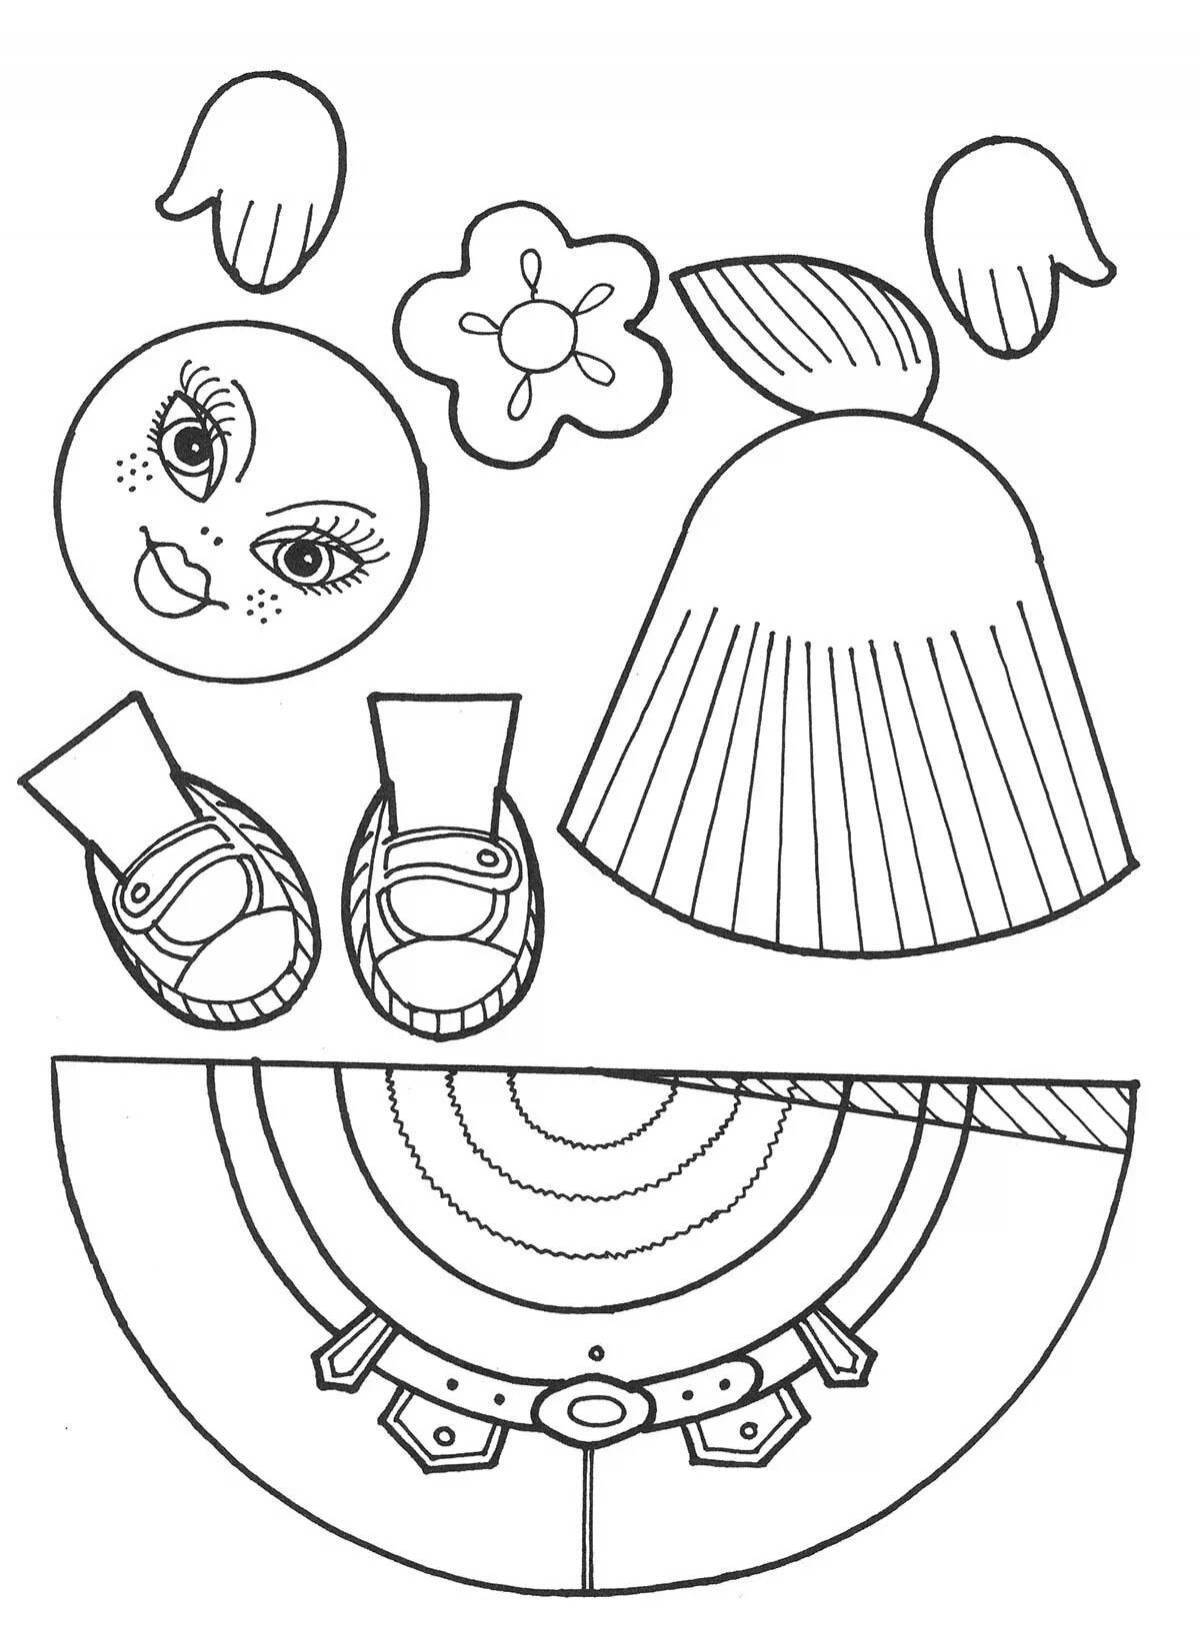 Inspirational coloring pages for kids